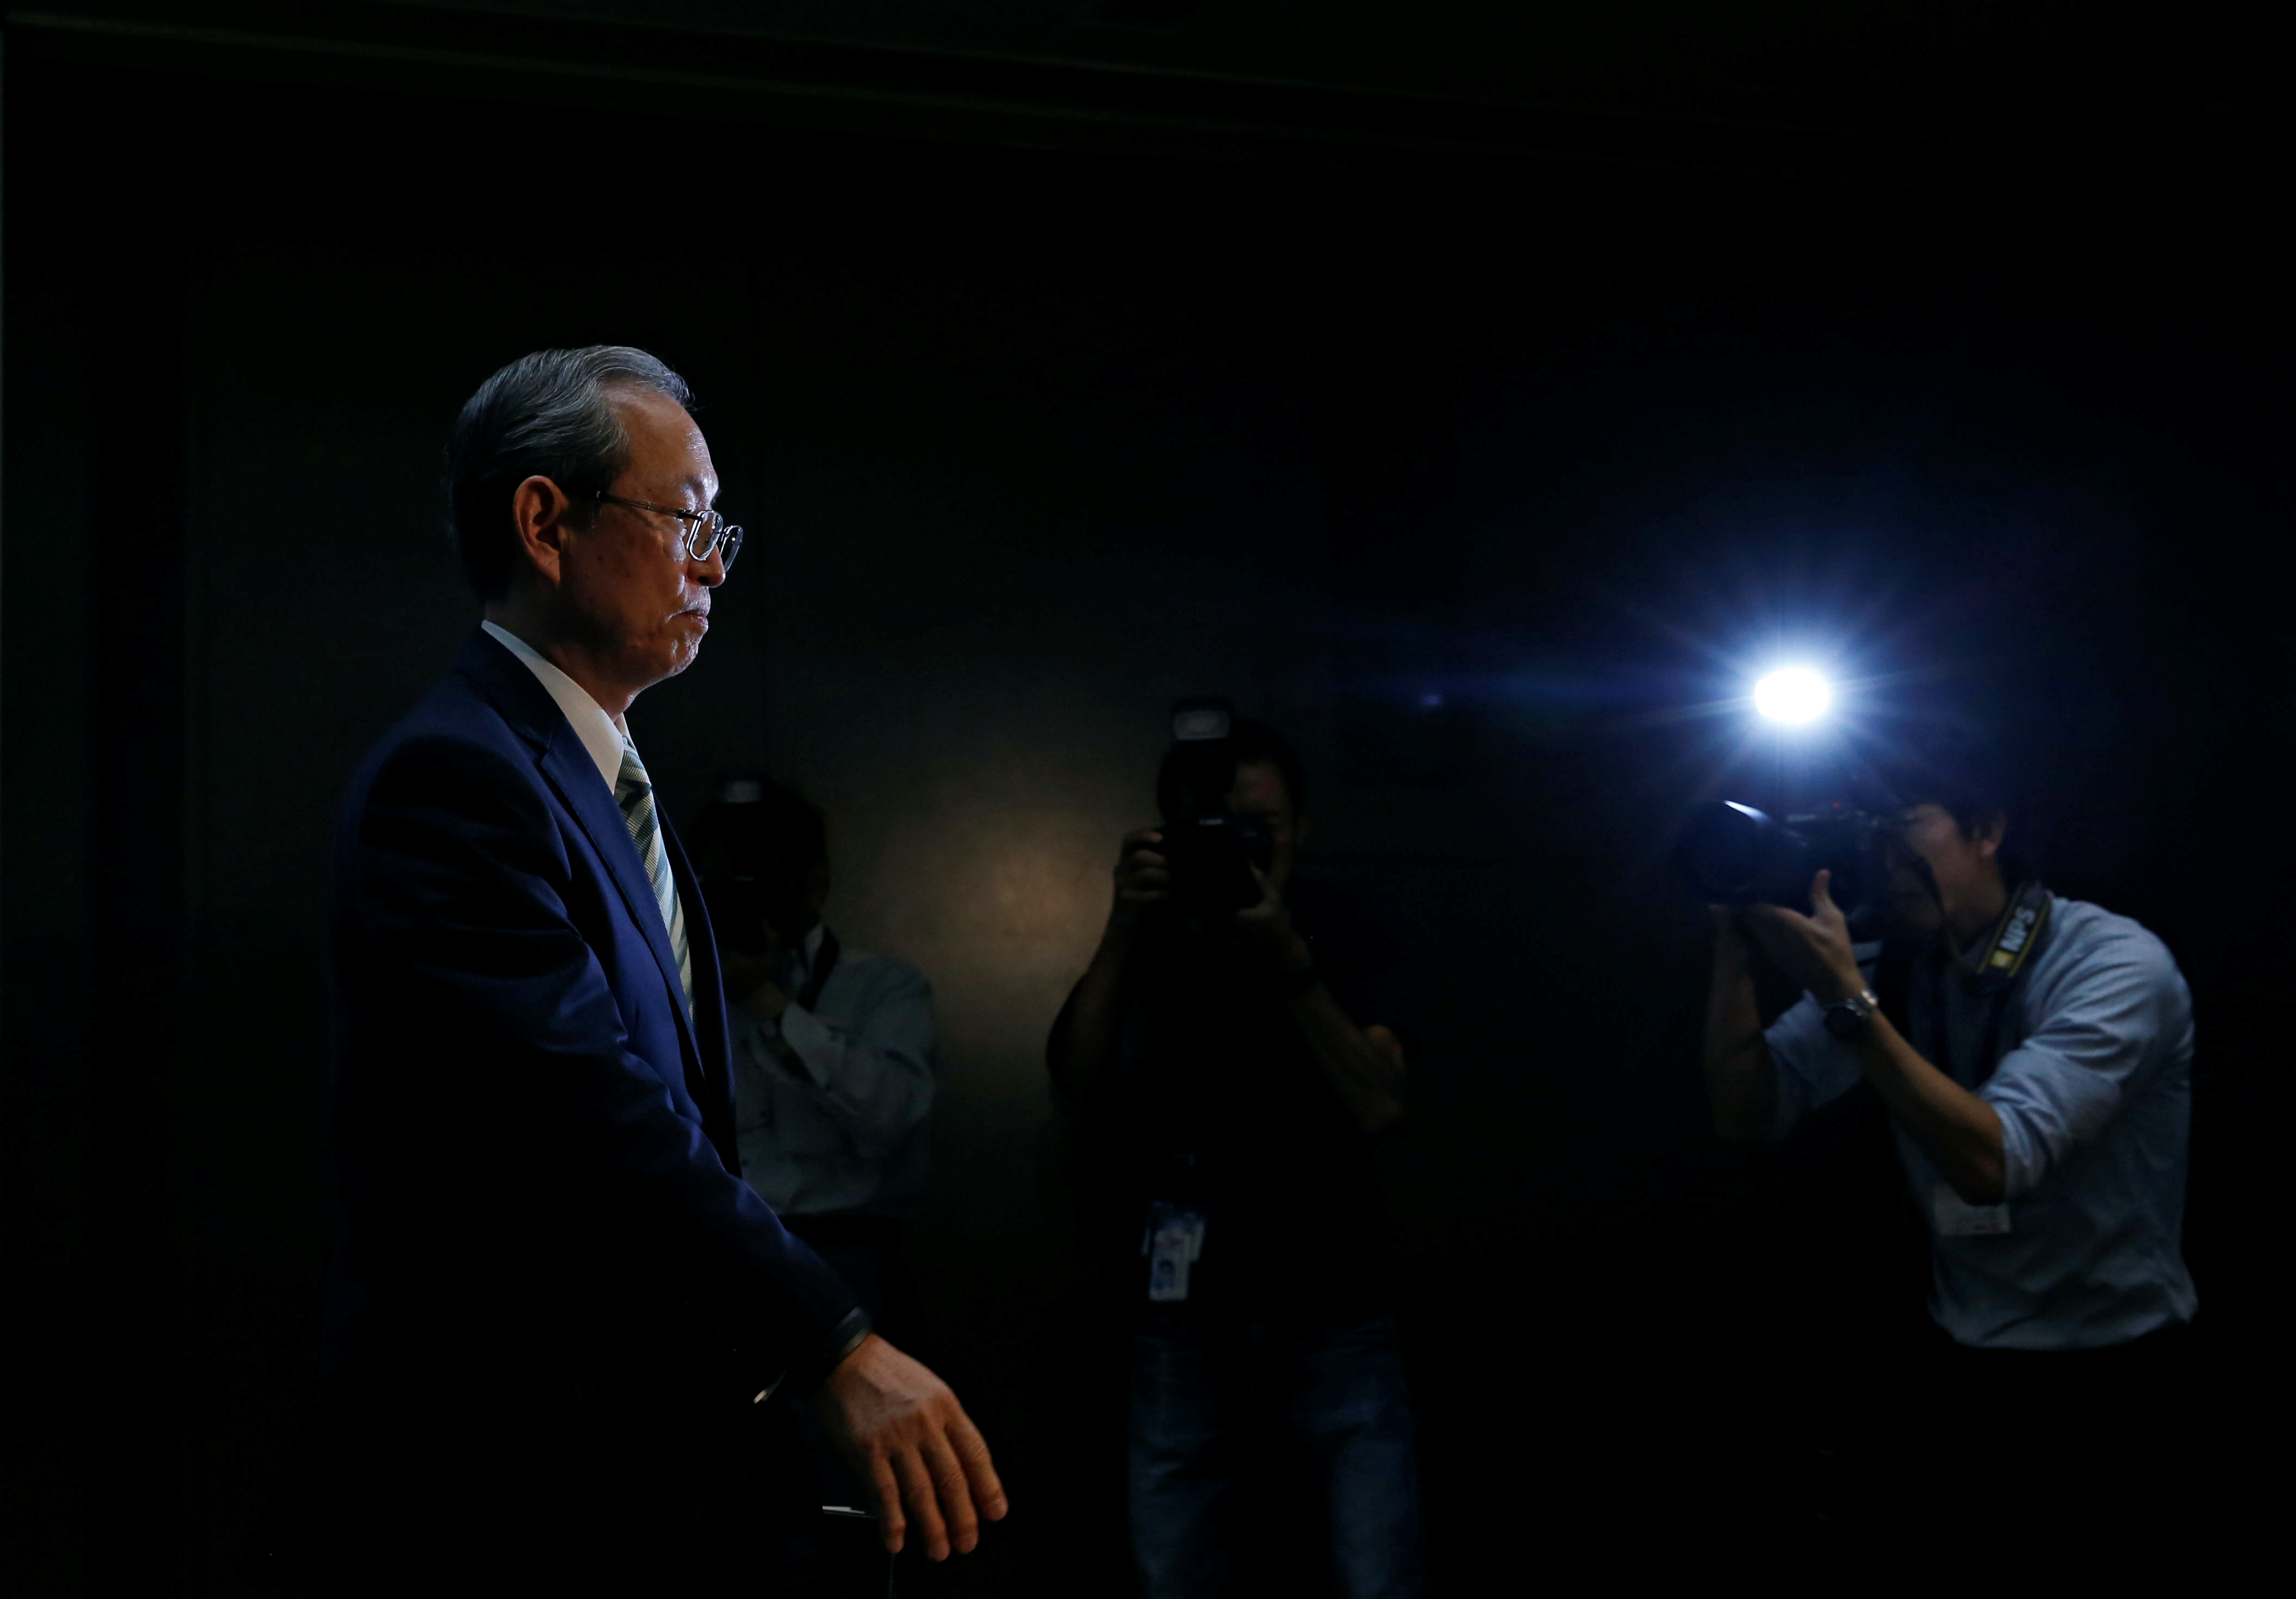 TOKYO, Japan - Go Egami (L), new president of the Incubator Bank of Japan,  shows a stern look during a news conference at the Bank of Japan's  headquarters in Tokyo on July